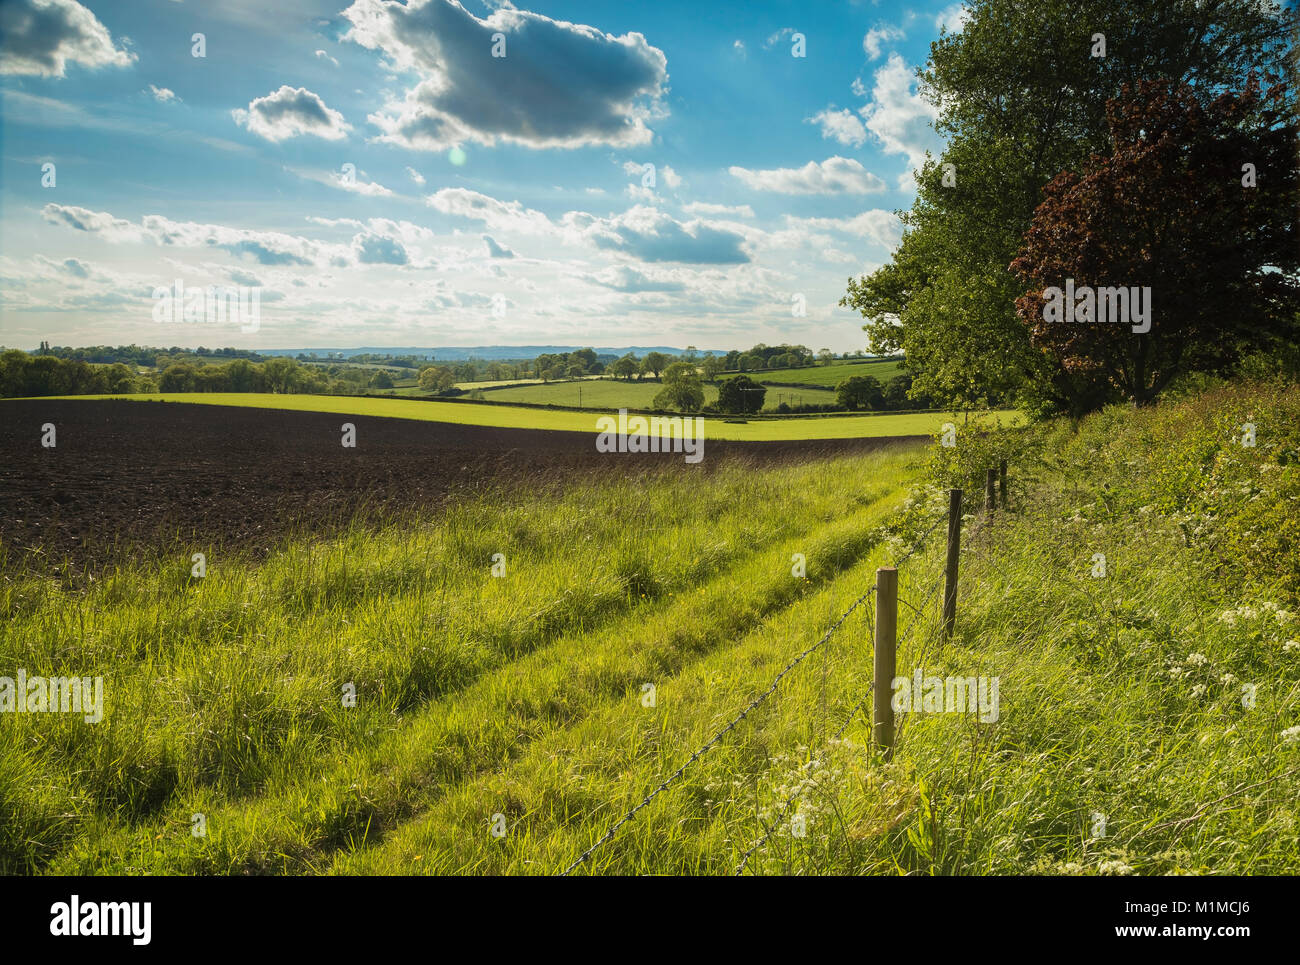 An image of Leicestershire countryside shot in late spring near to Hungarton, England UK. Stock Photo